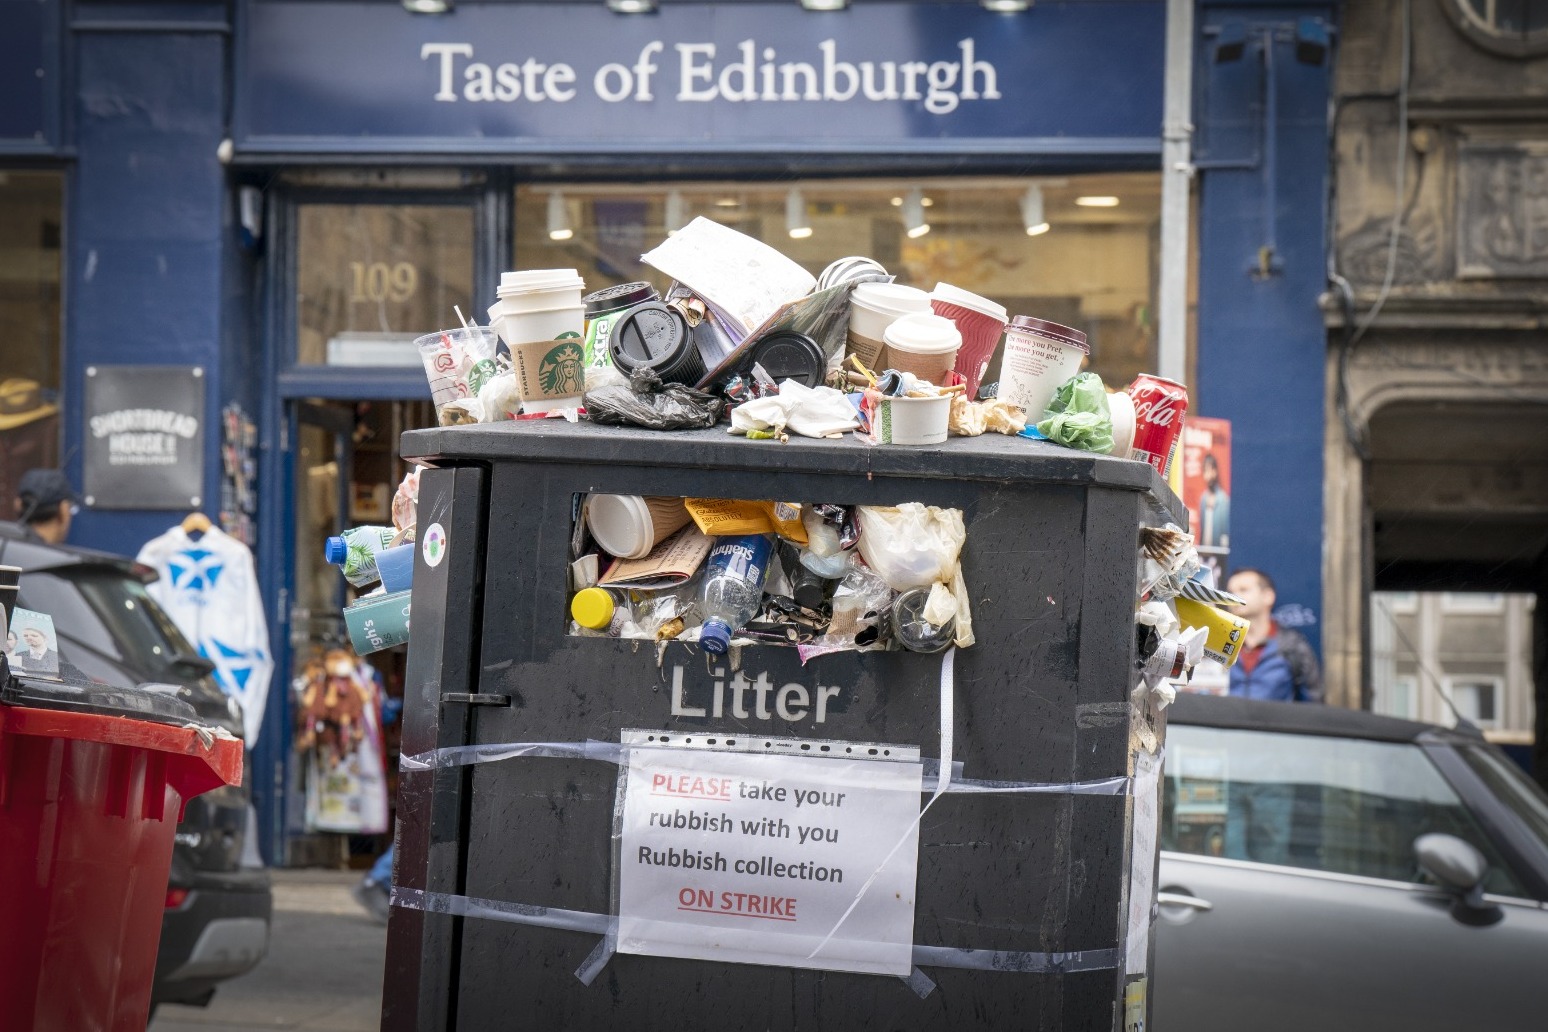 Angus Robertson: Labour-led council to blame for overflowing Edinburgh rubbish 